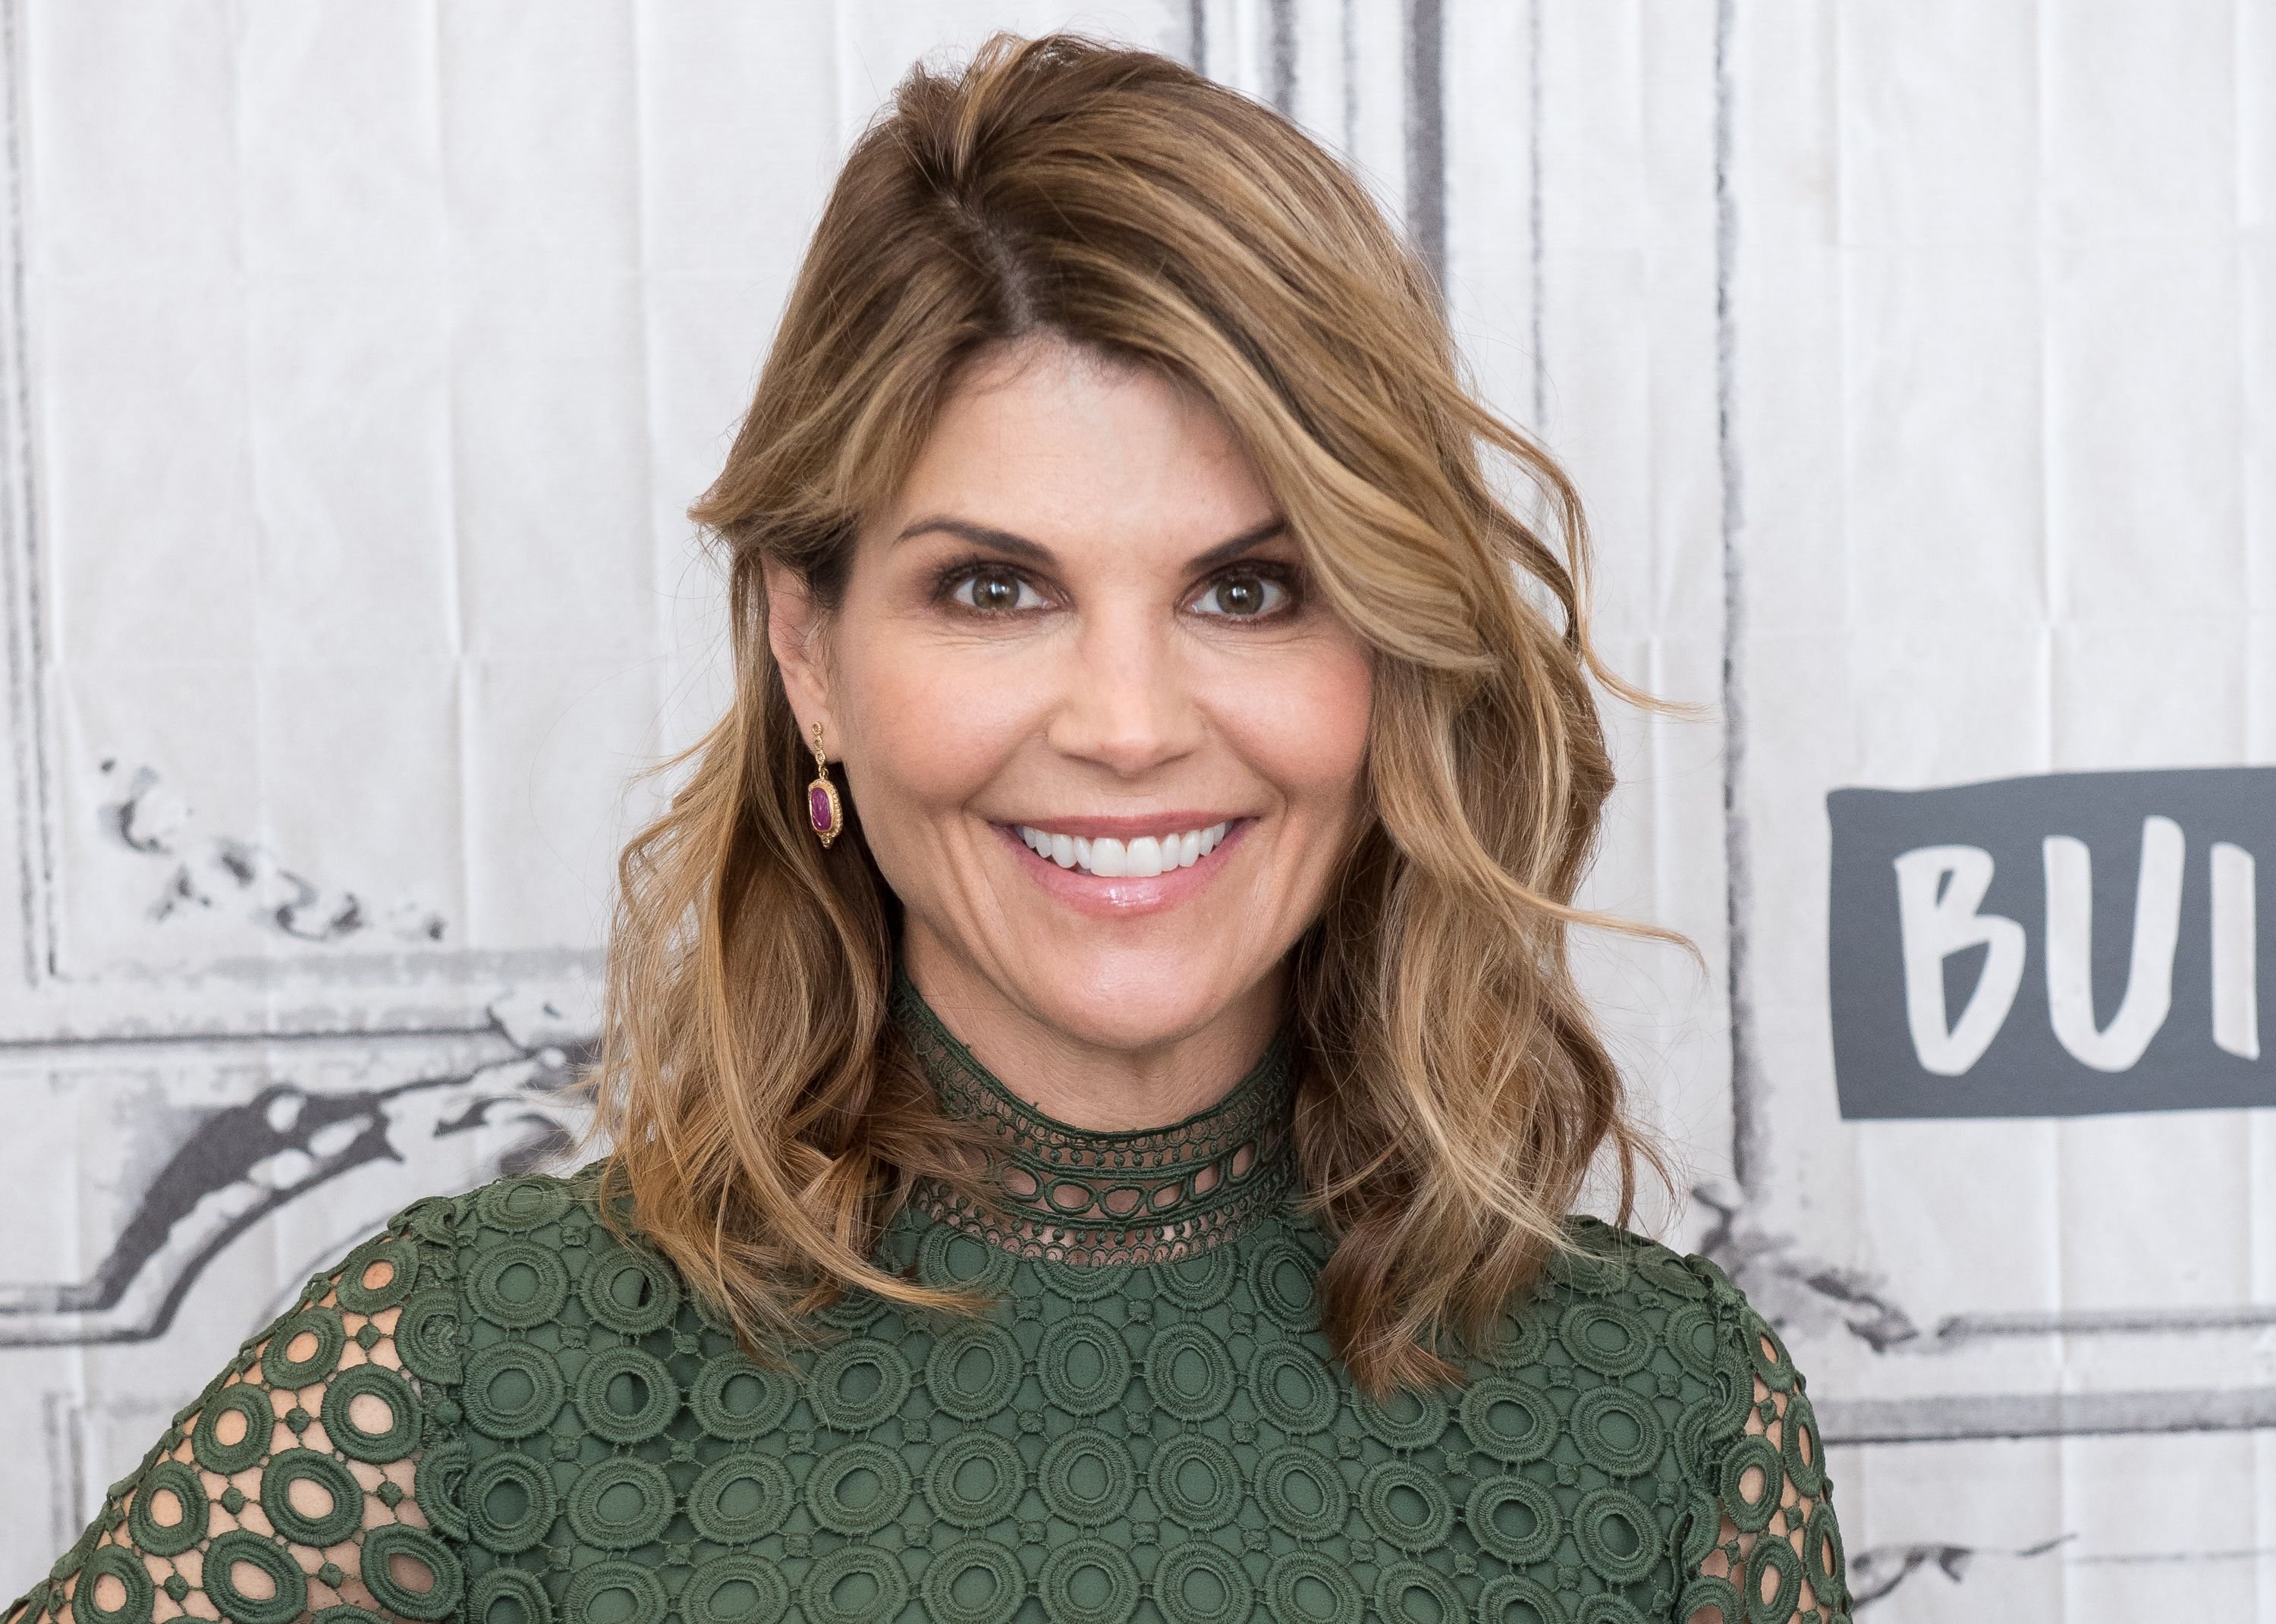 Lori Loughlin visits Build Series at Build Studio on February 15, 2018 | Photo: Getty Images